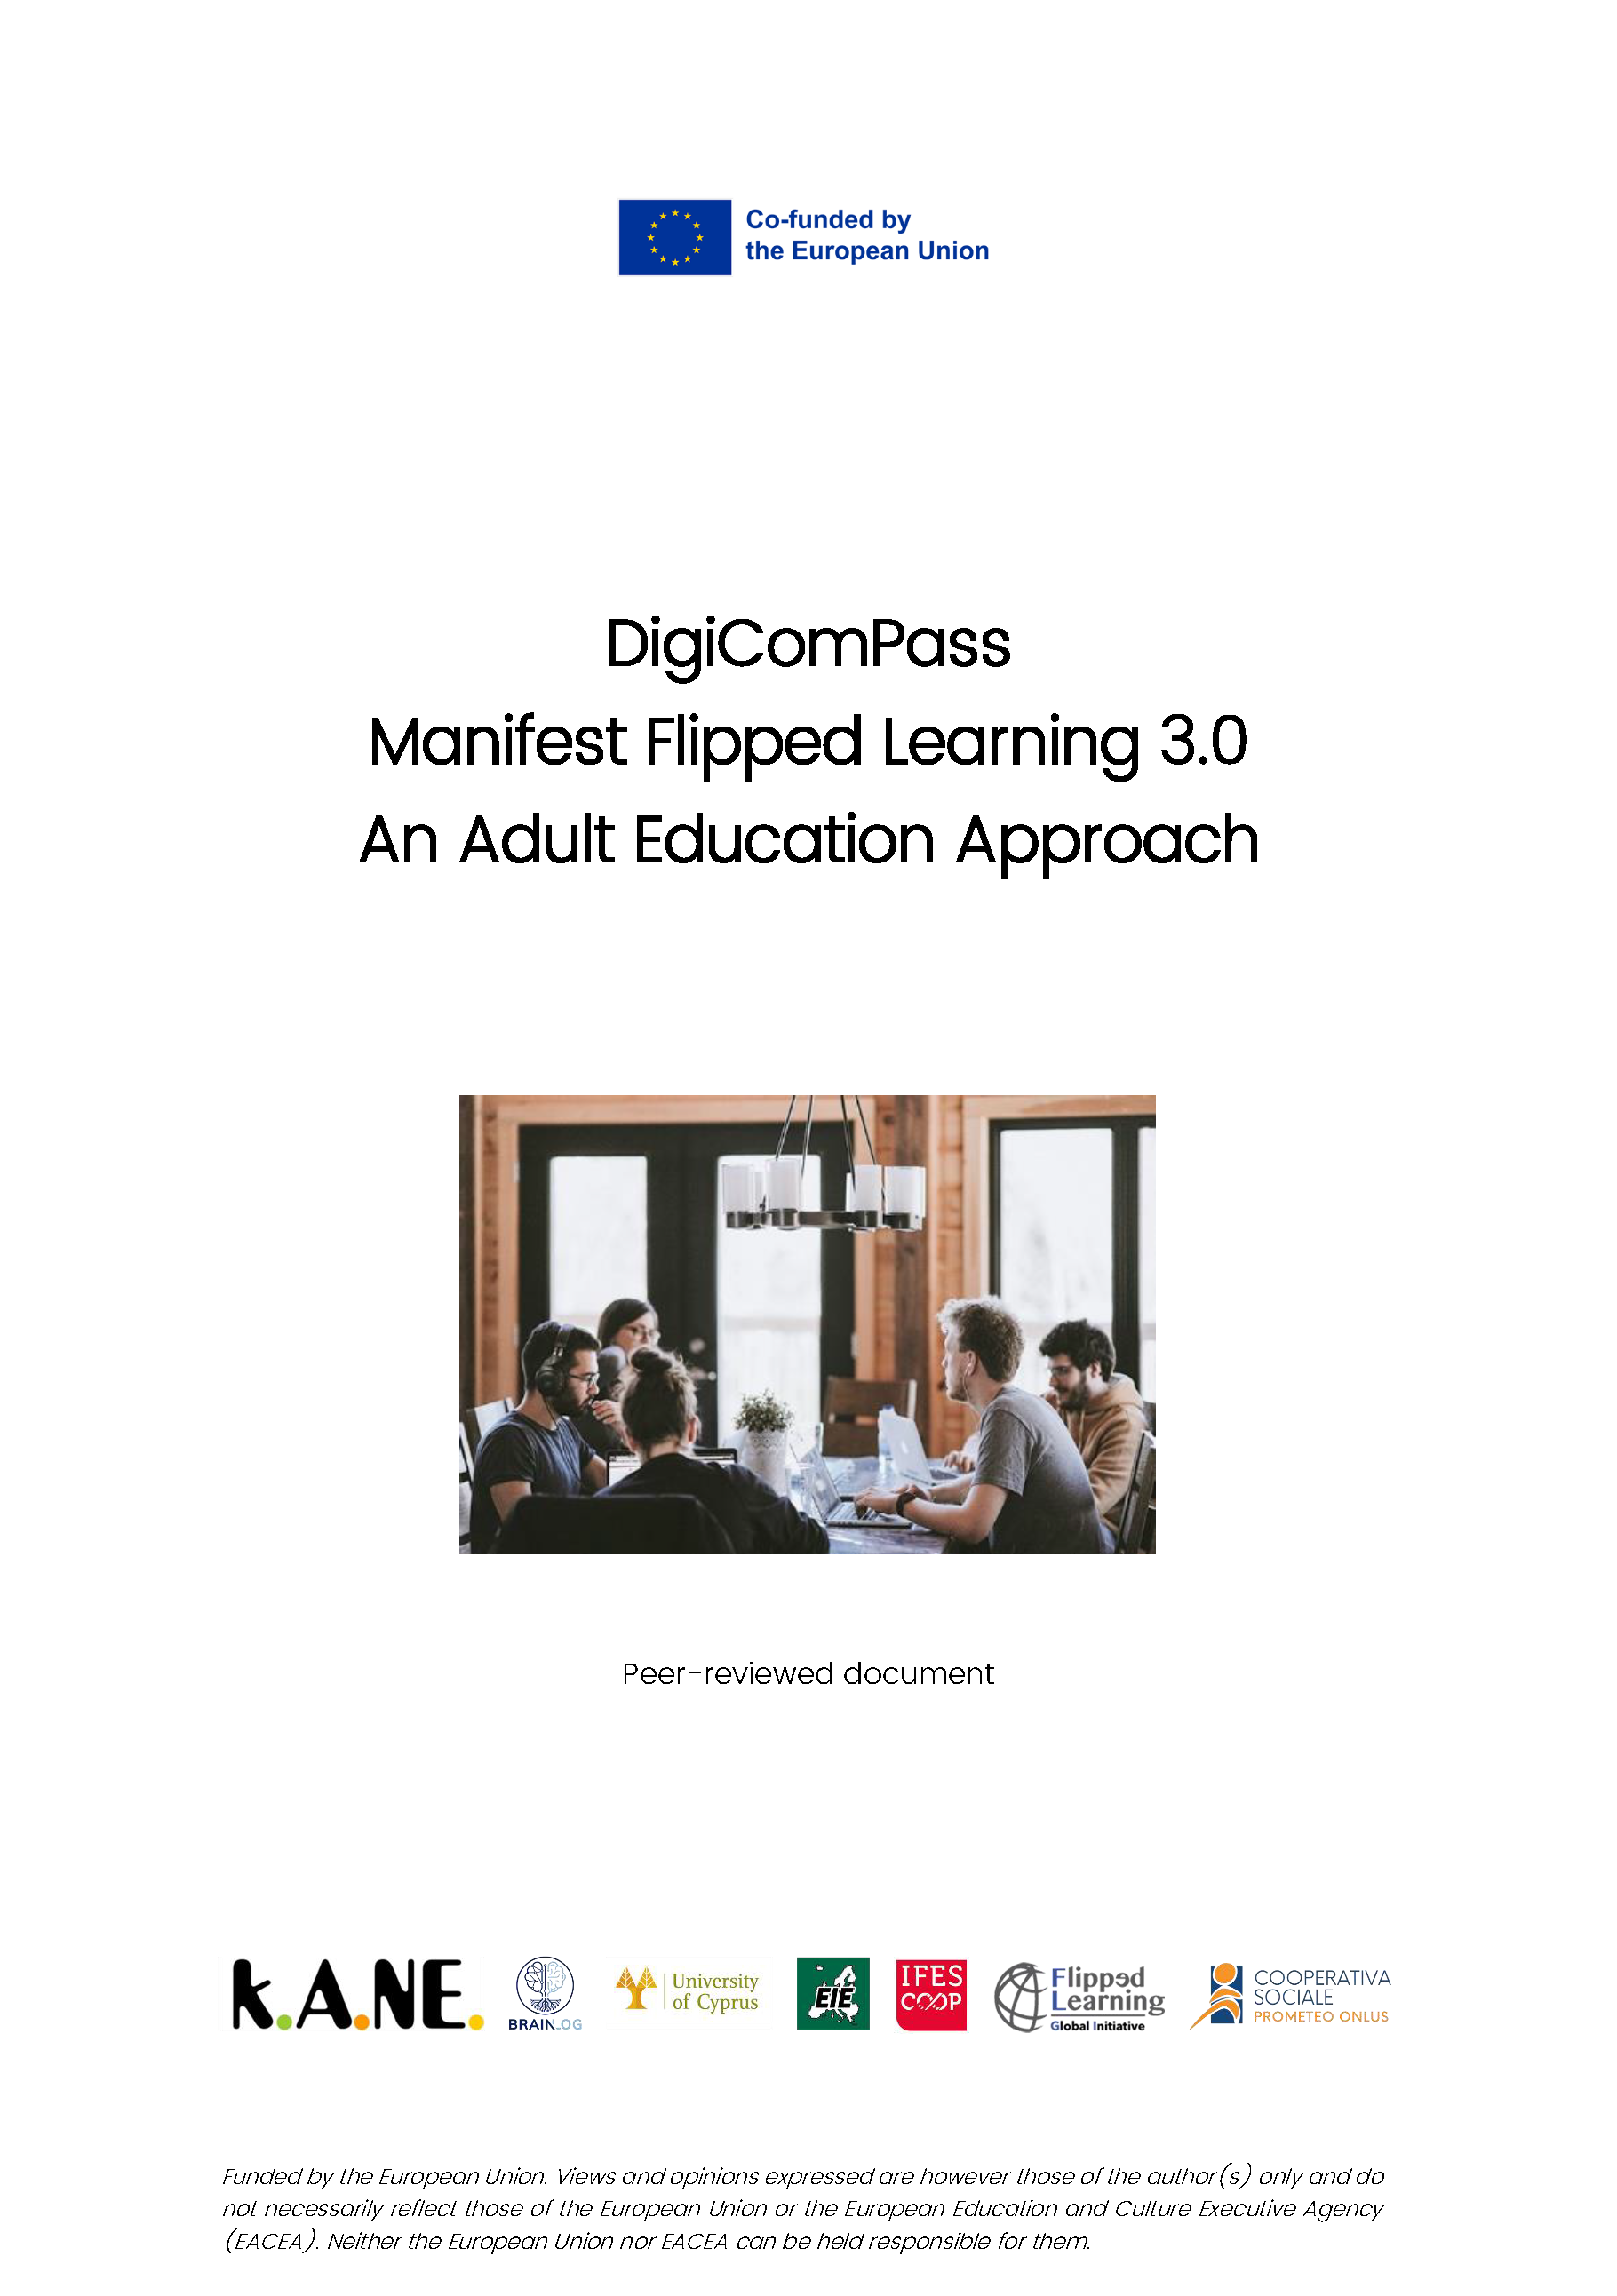 Cover of the Manifest Flipped Learning 3.0